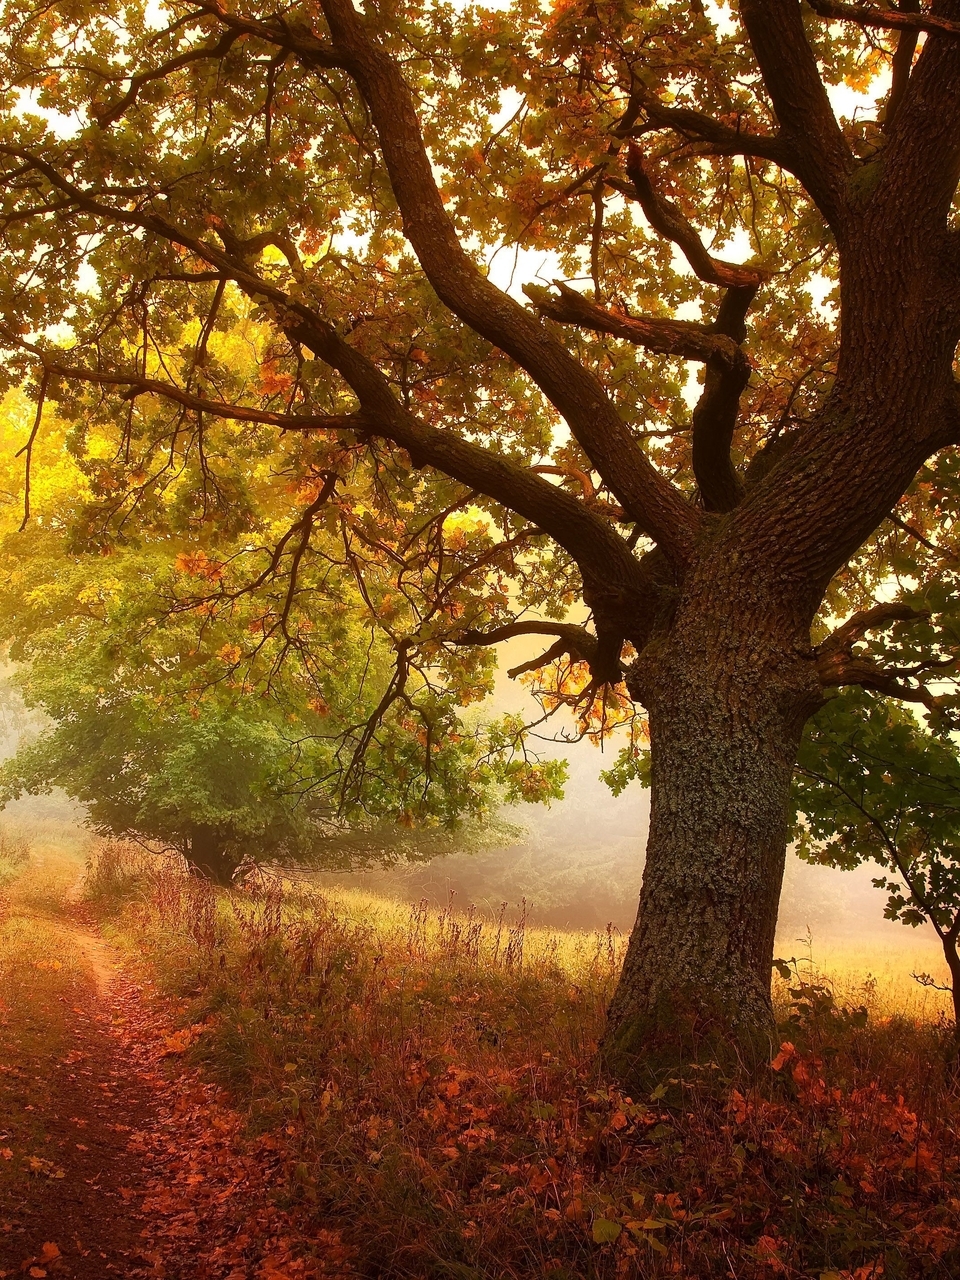 Image: Forest, trees, nature, autumn, leaves, road, fog